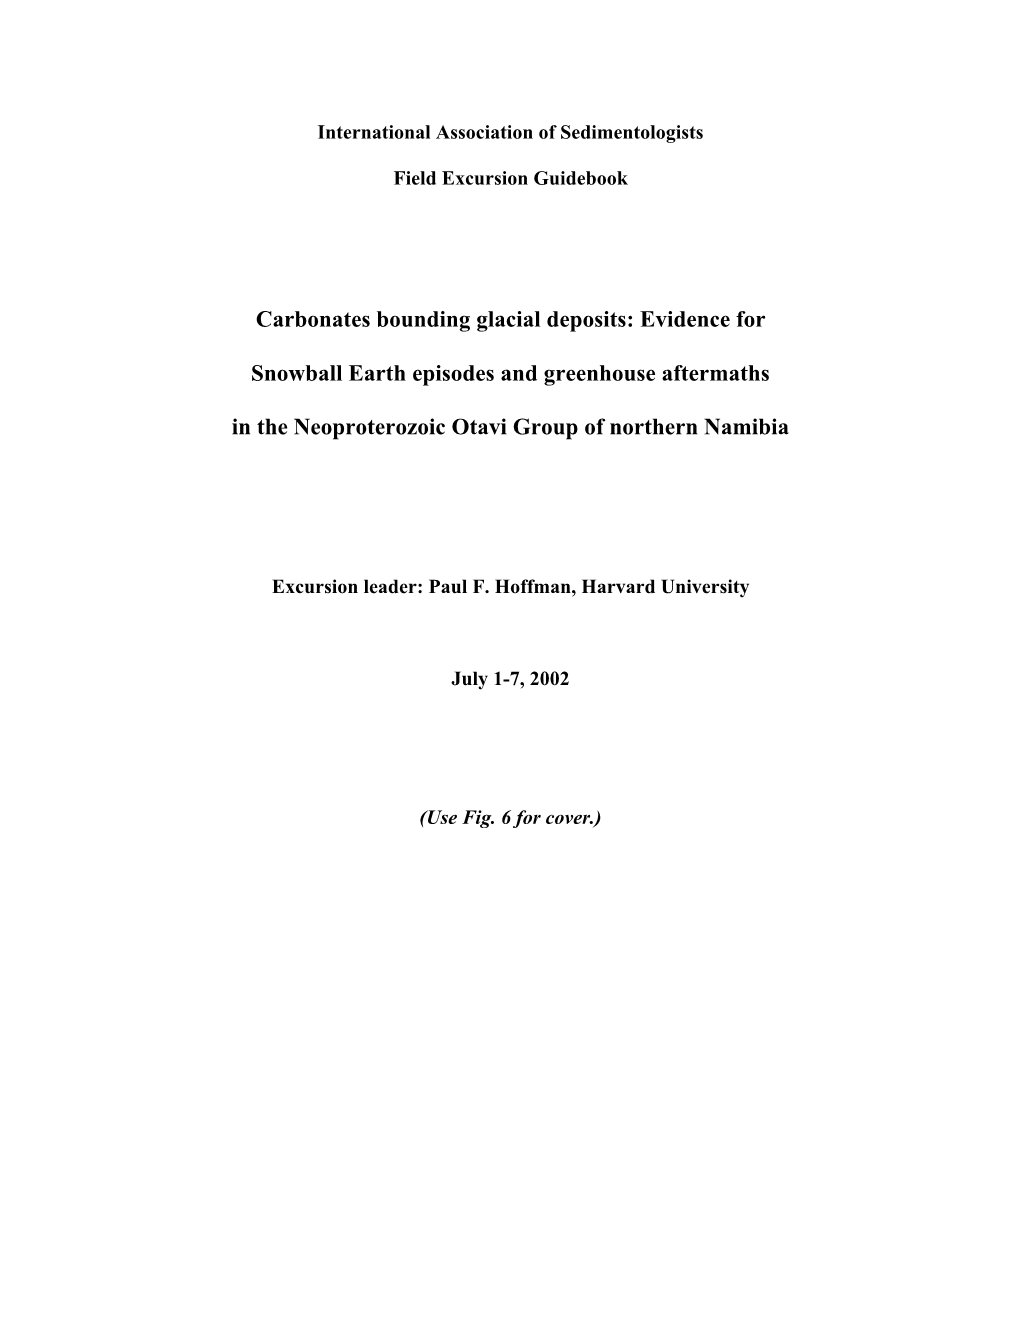 Carbonates Bounding Glacial Deposits: Evidence For